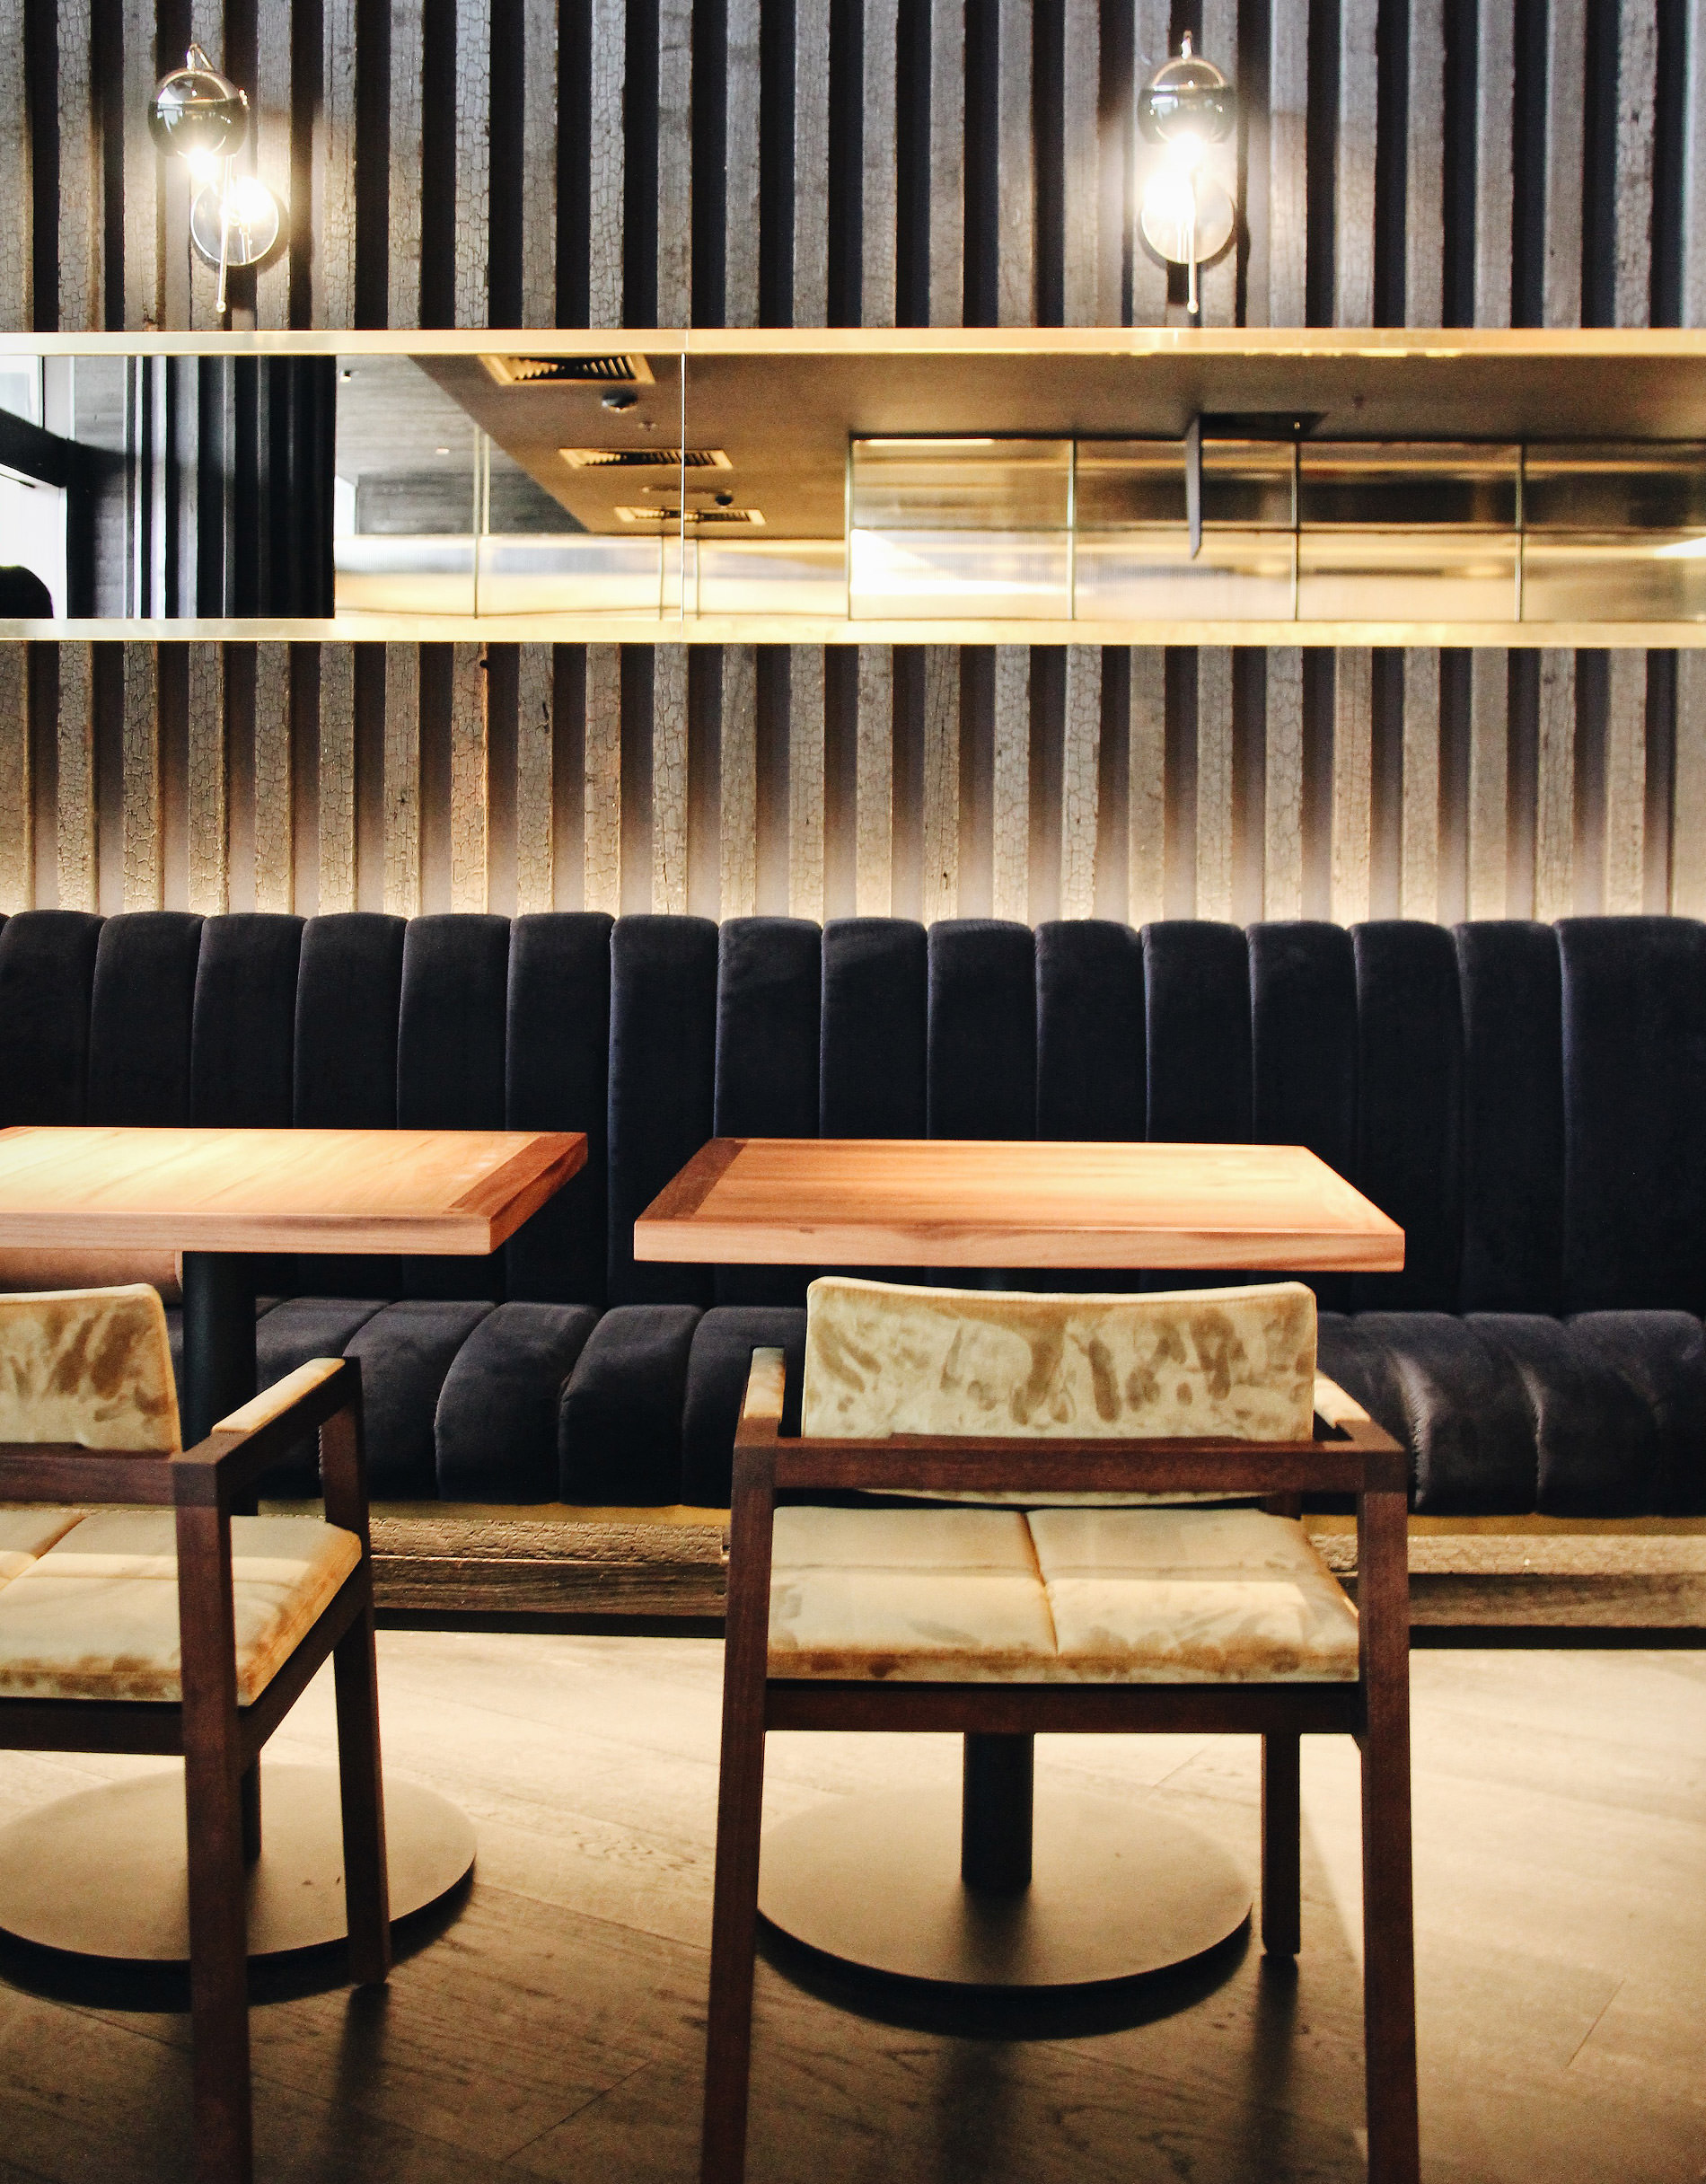 Warmth and glamour evoked as you enter this sensation Japanese restaurant and escorted to your designer dining chair by Australian designer FrancoCrea for a night of delight